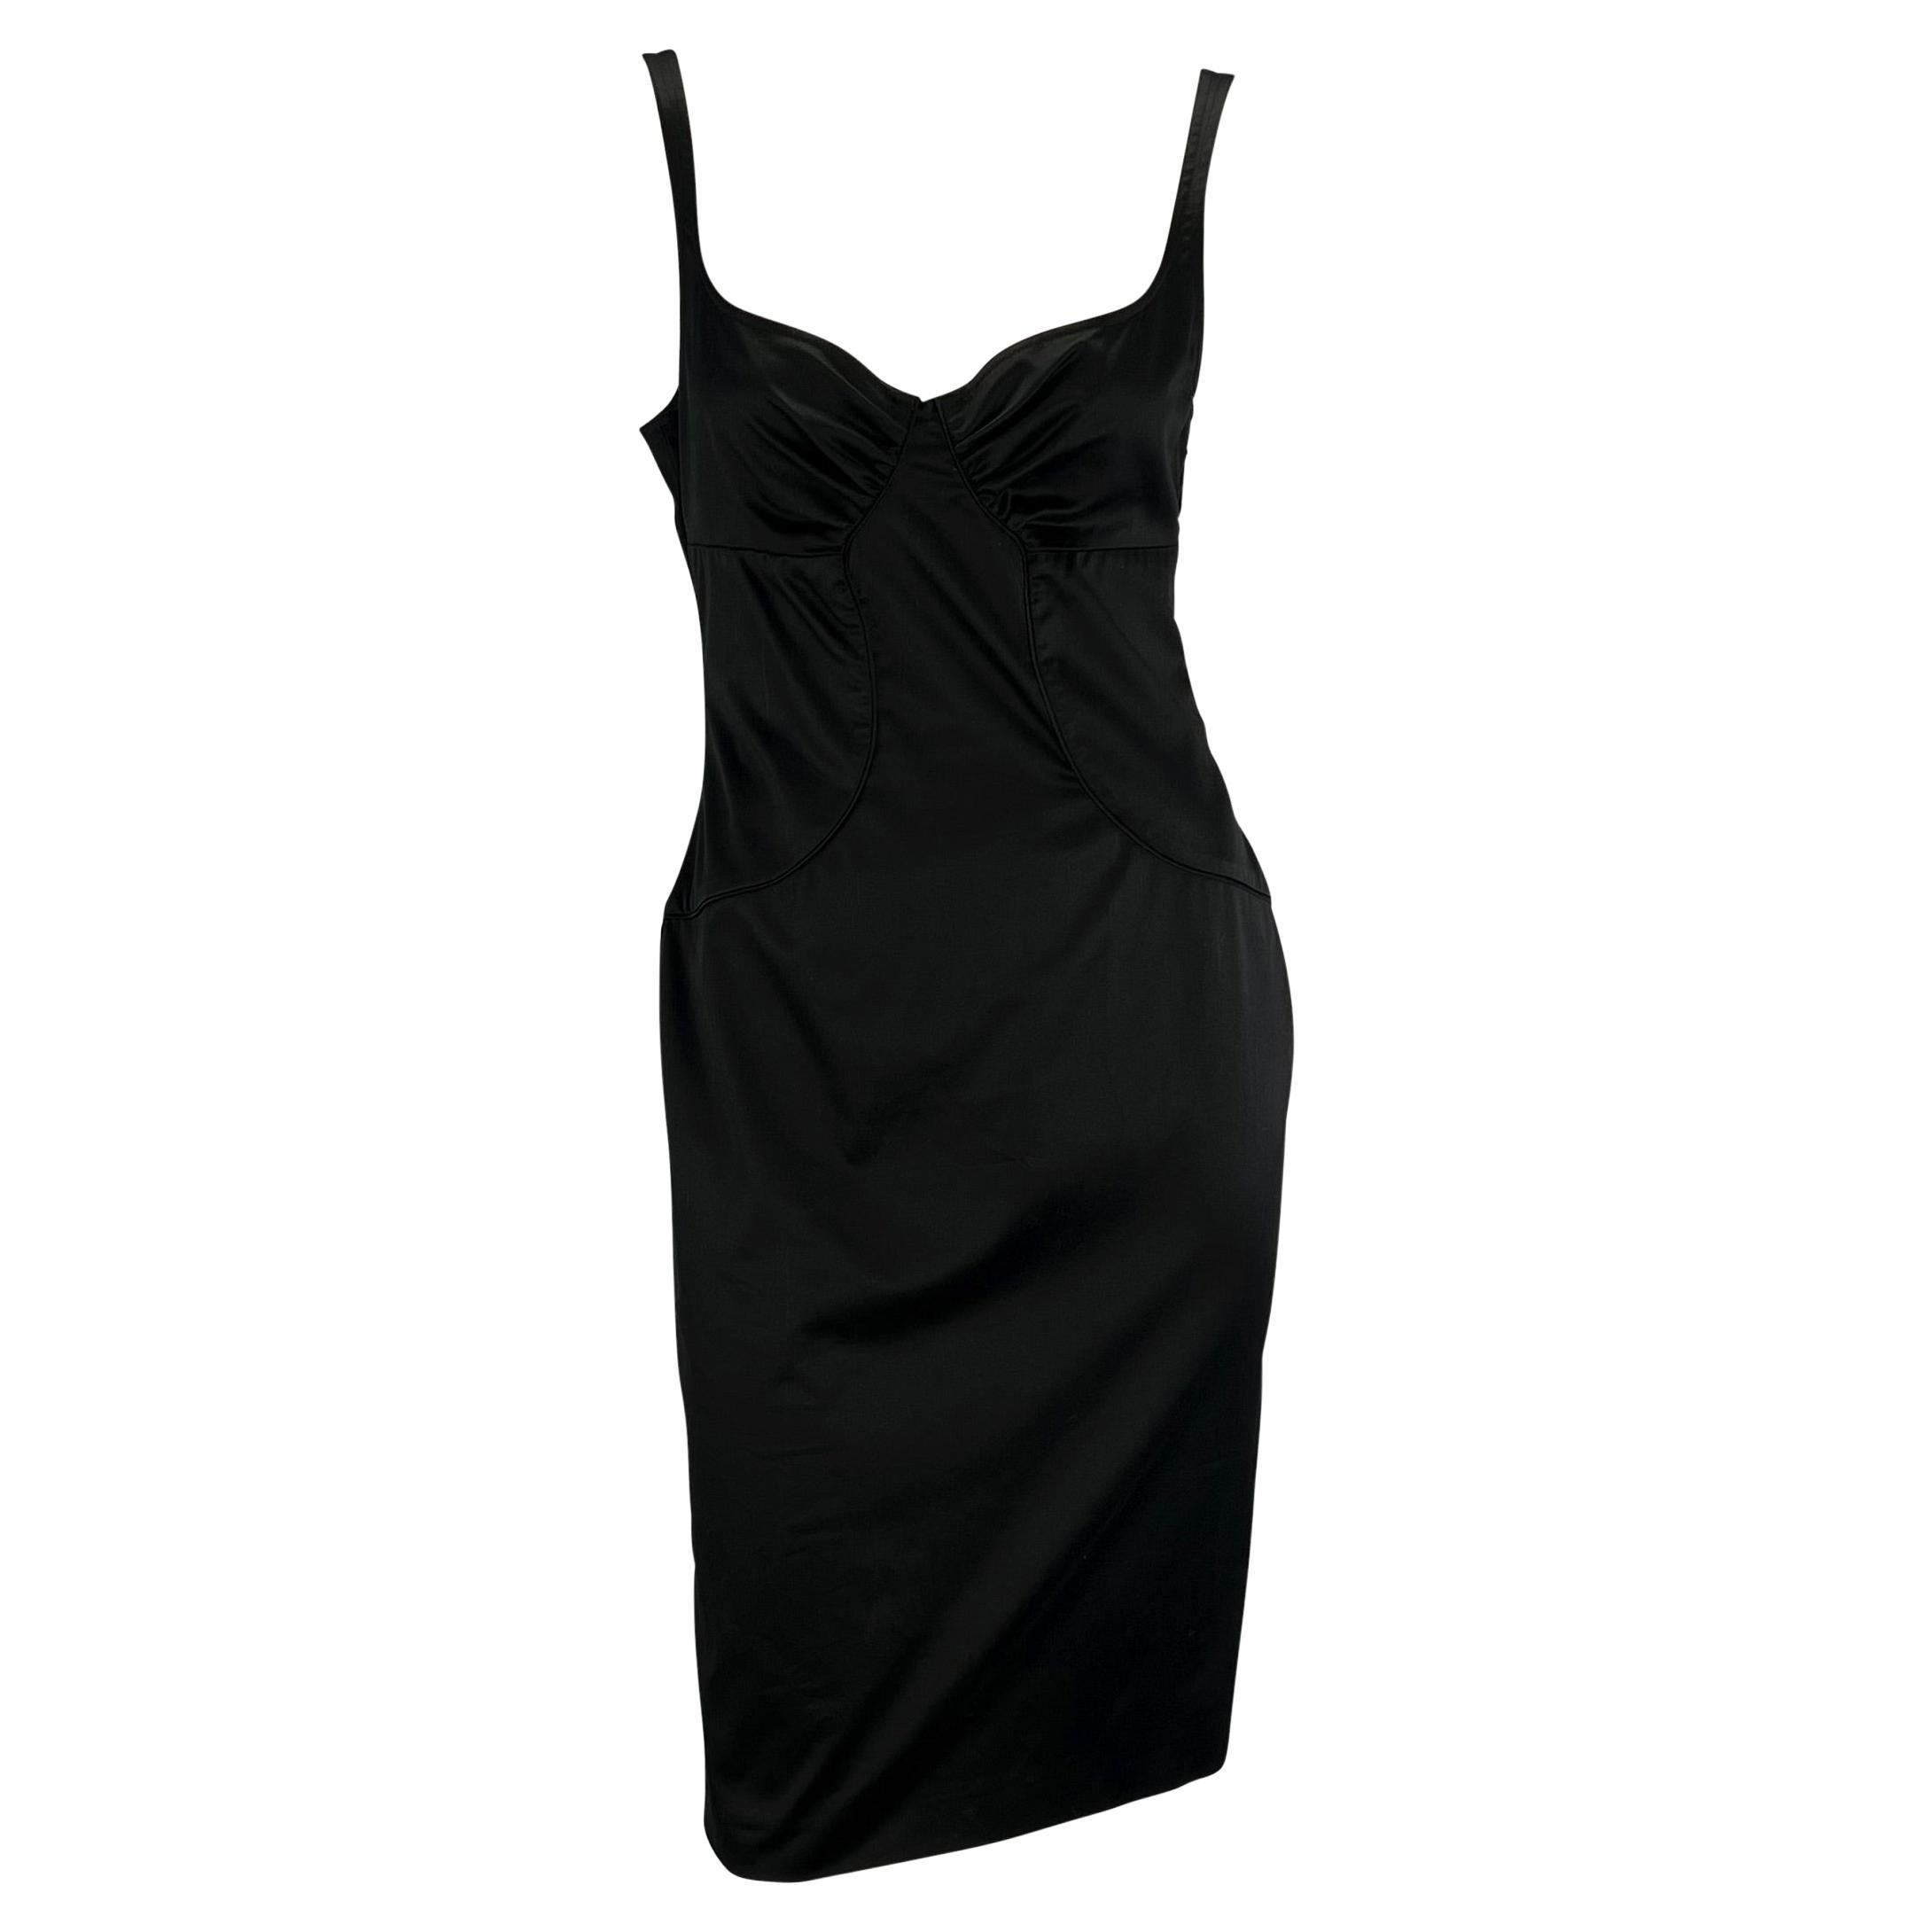 2003 Gucci by Tom Ford Back Tie Black Sleeveless Cutout Dress  1